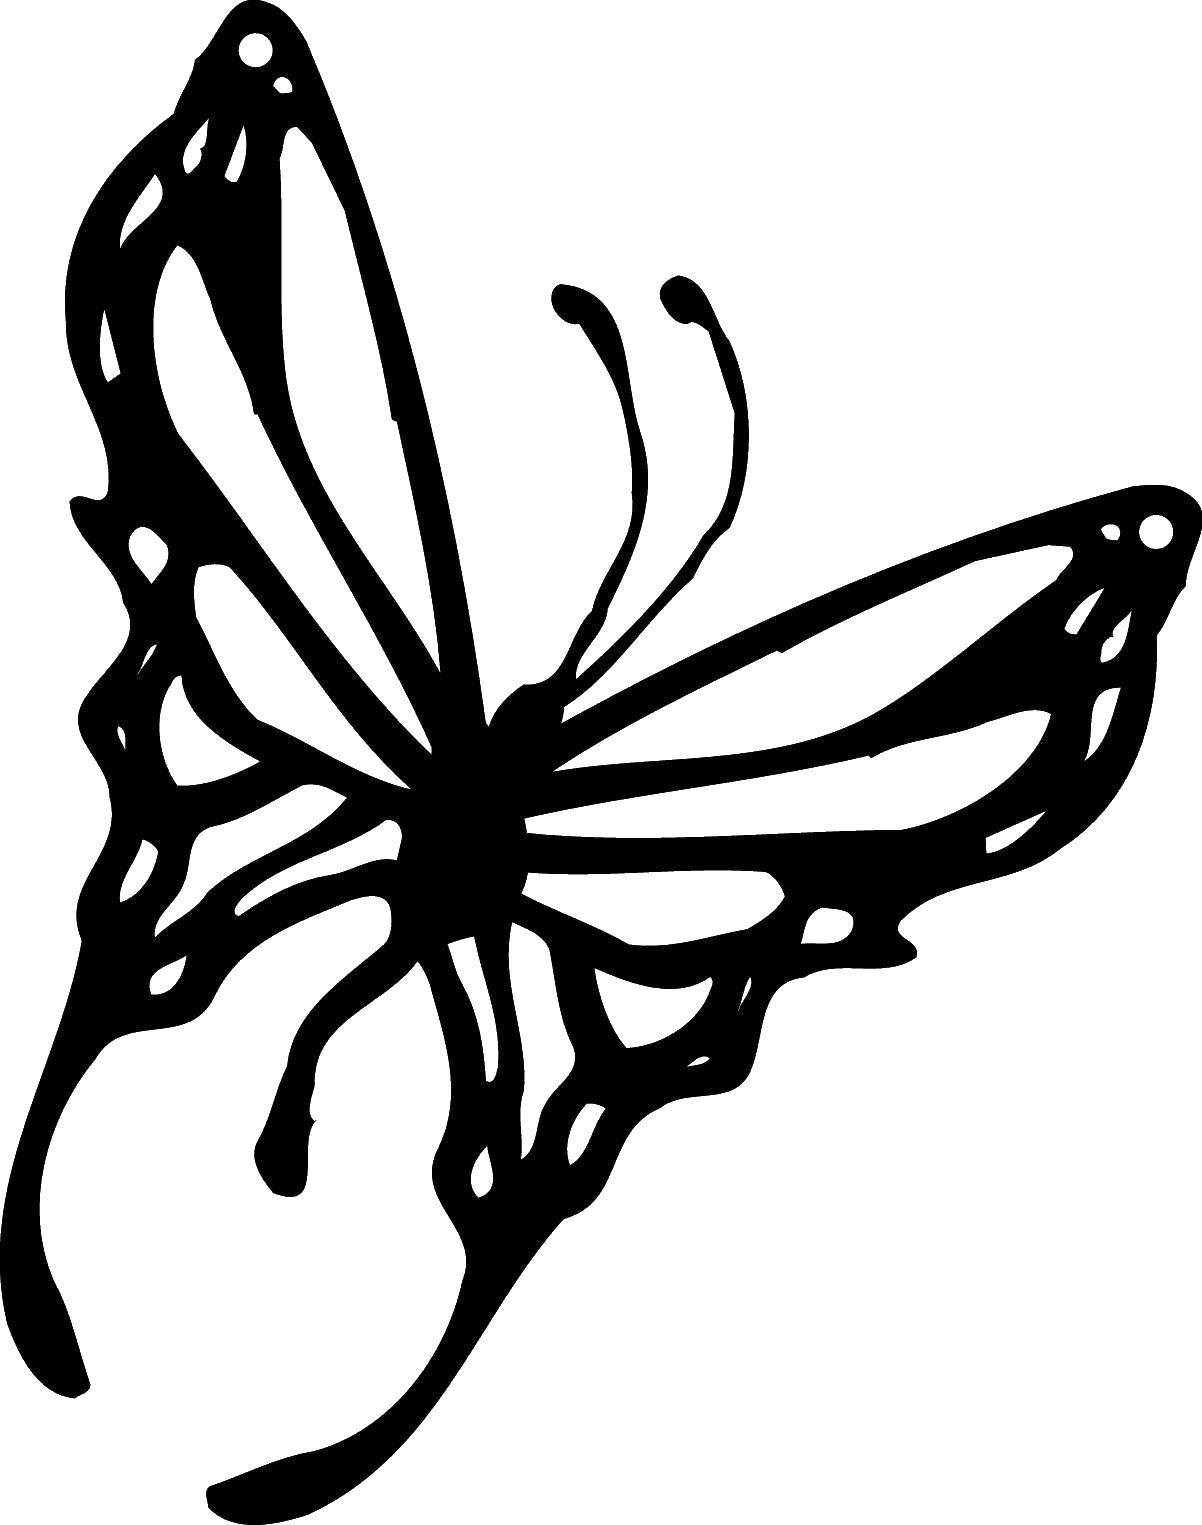 Coloring Paint the wings. Category butterflies. Tags:  insects, butterfly, wings.